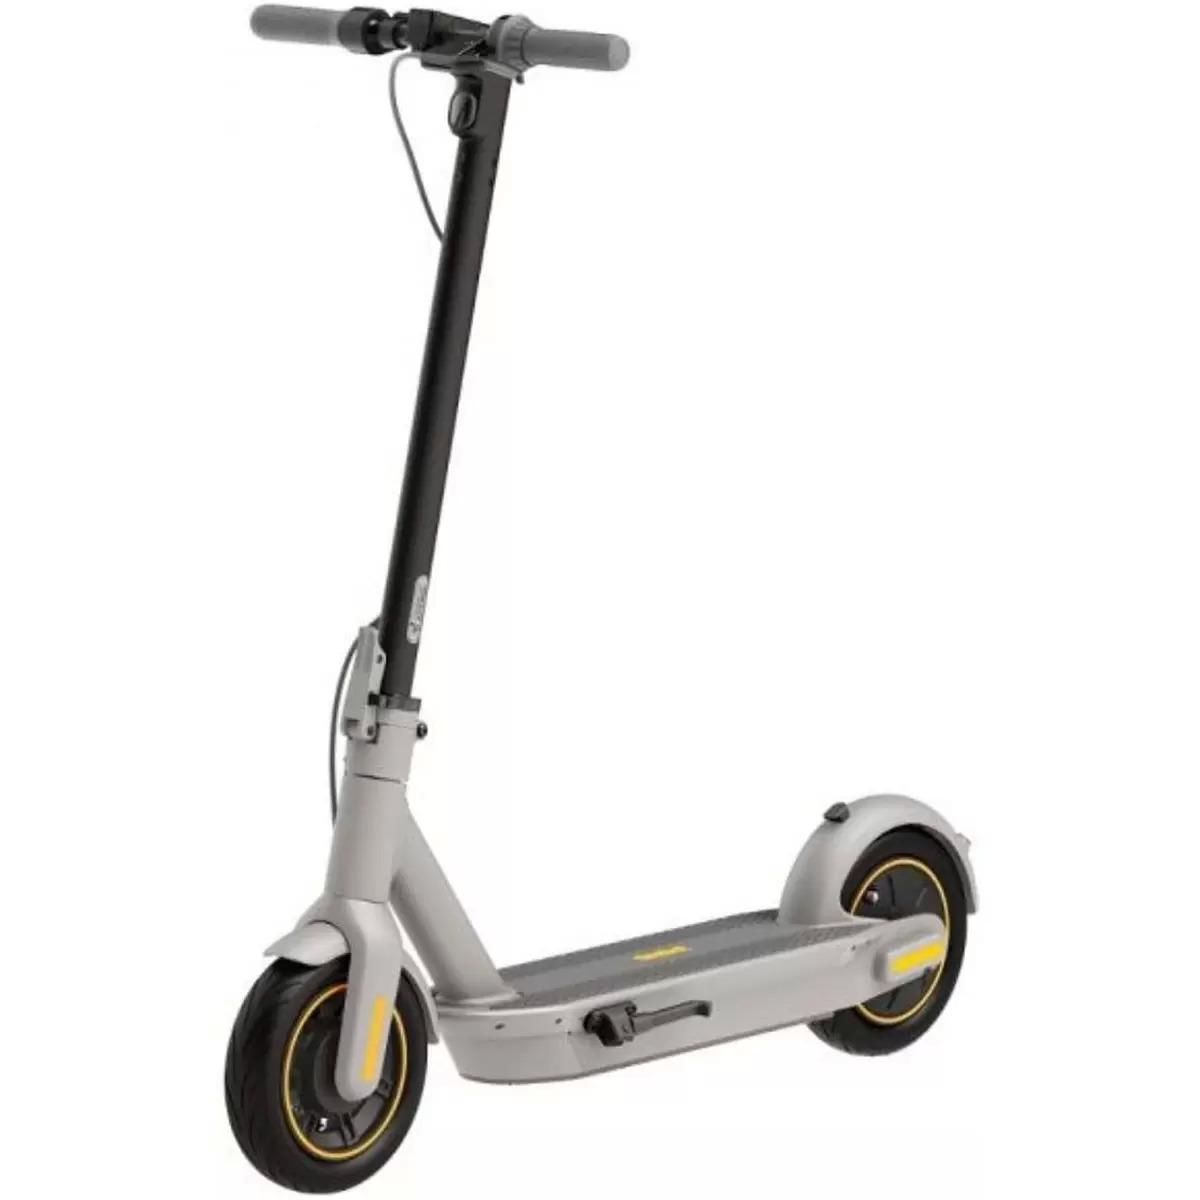 Segway Ninebot G30LP Max Electric Kick Scooter for $499.99 Shipped